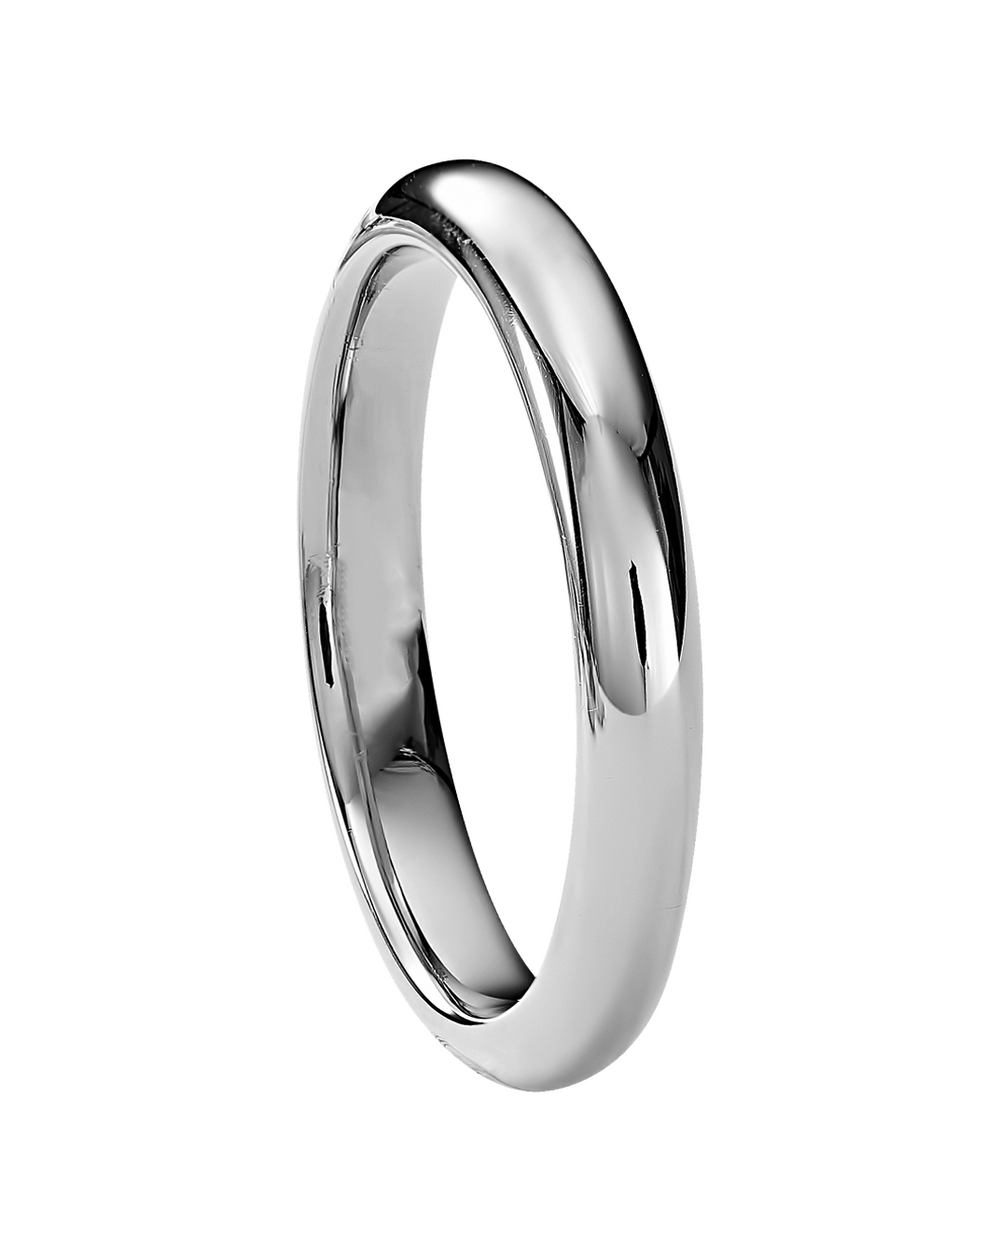 Minimalist Classical Wedding Band in Solid Gold